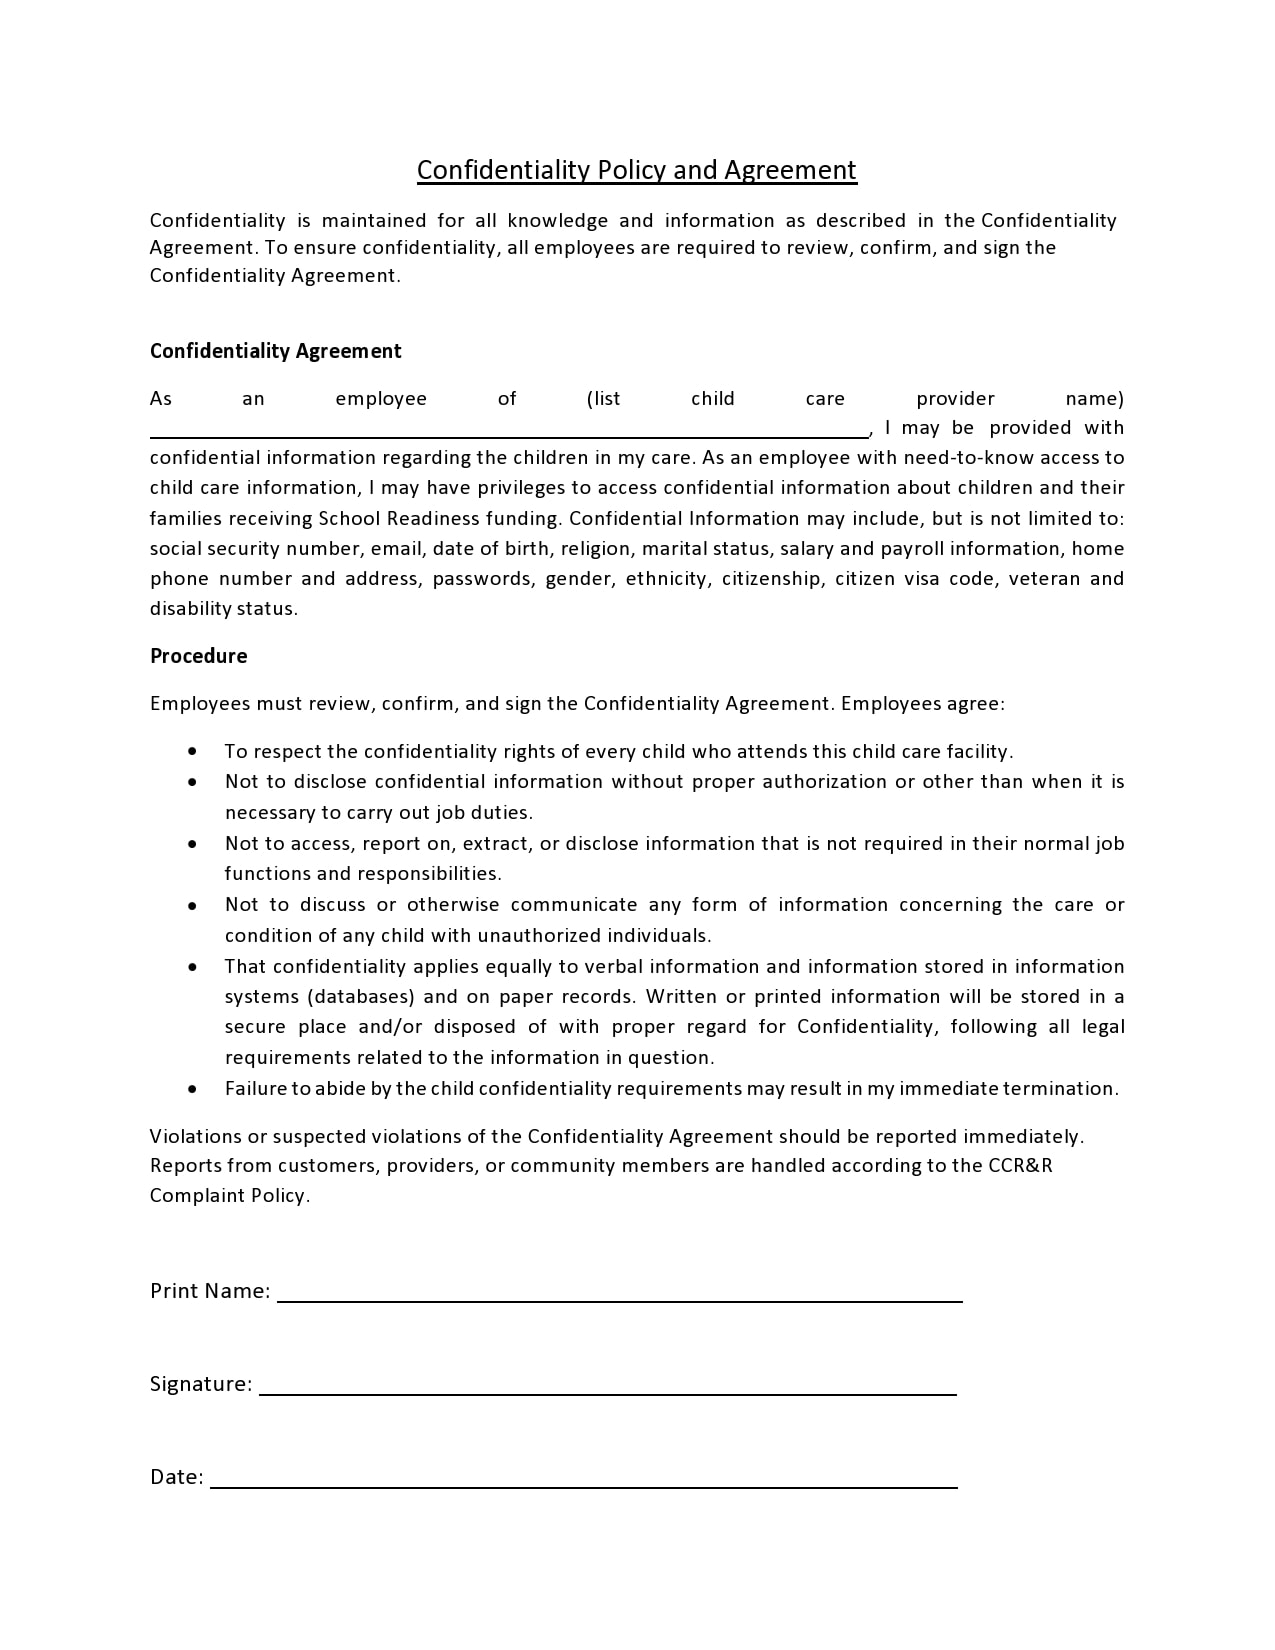 Confidentiality Agreement Cost